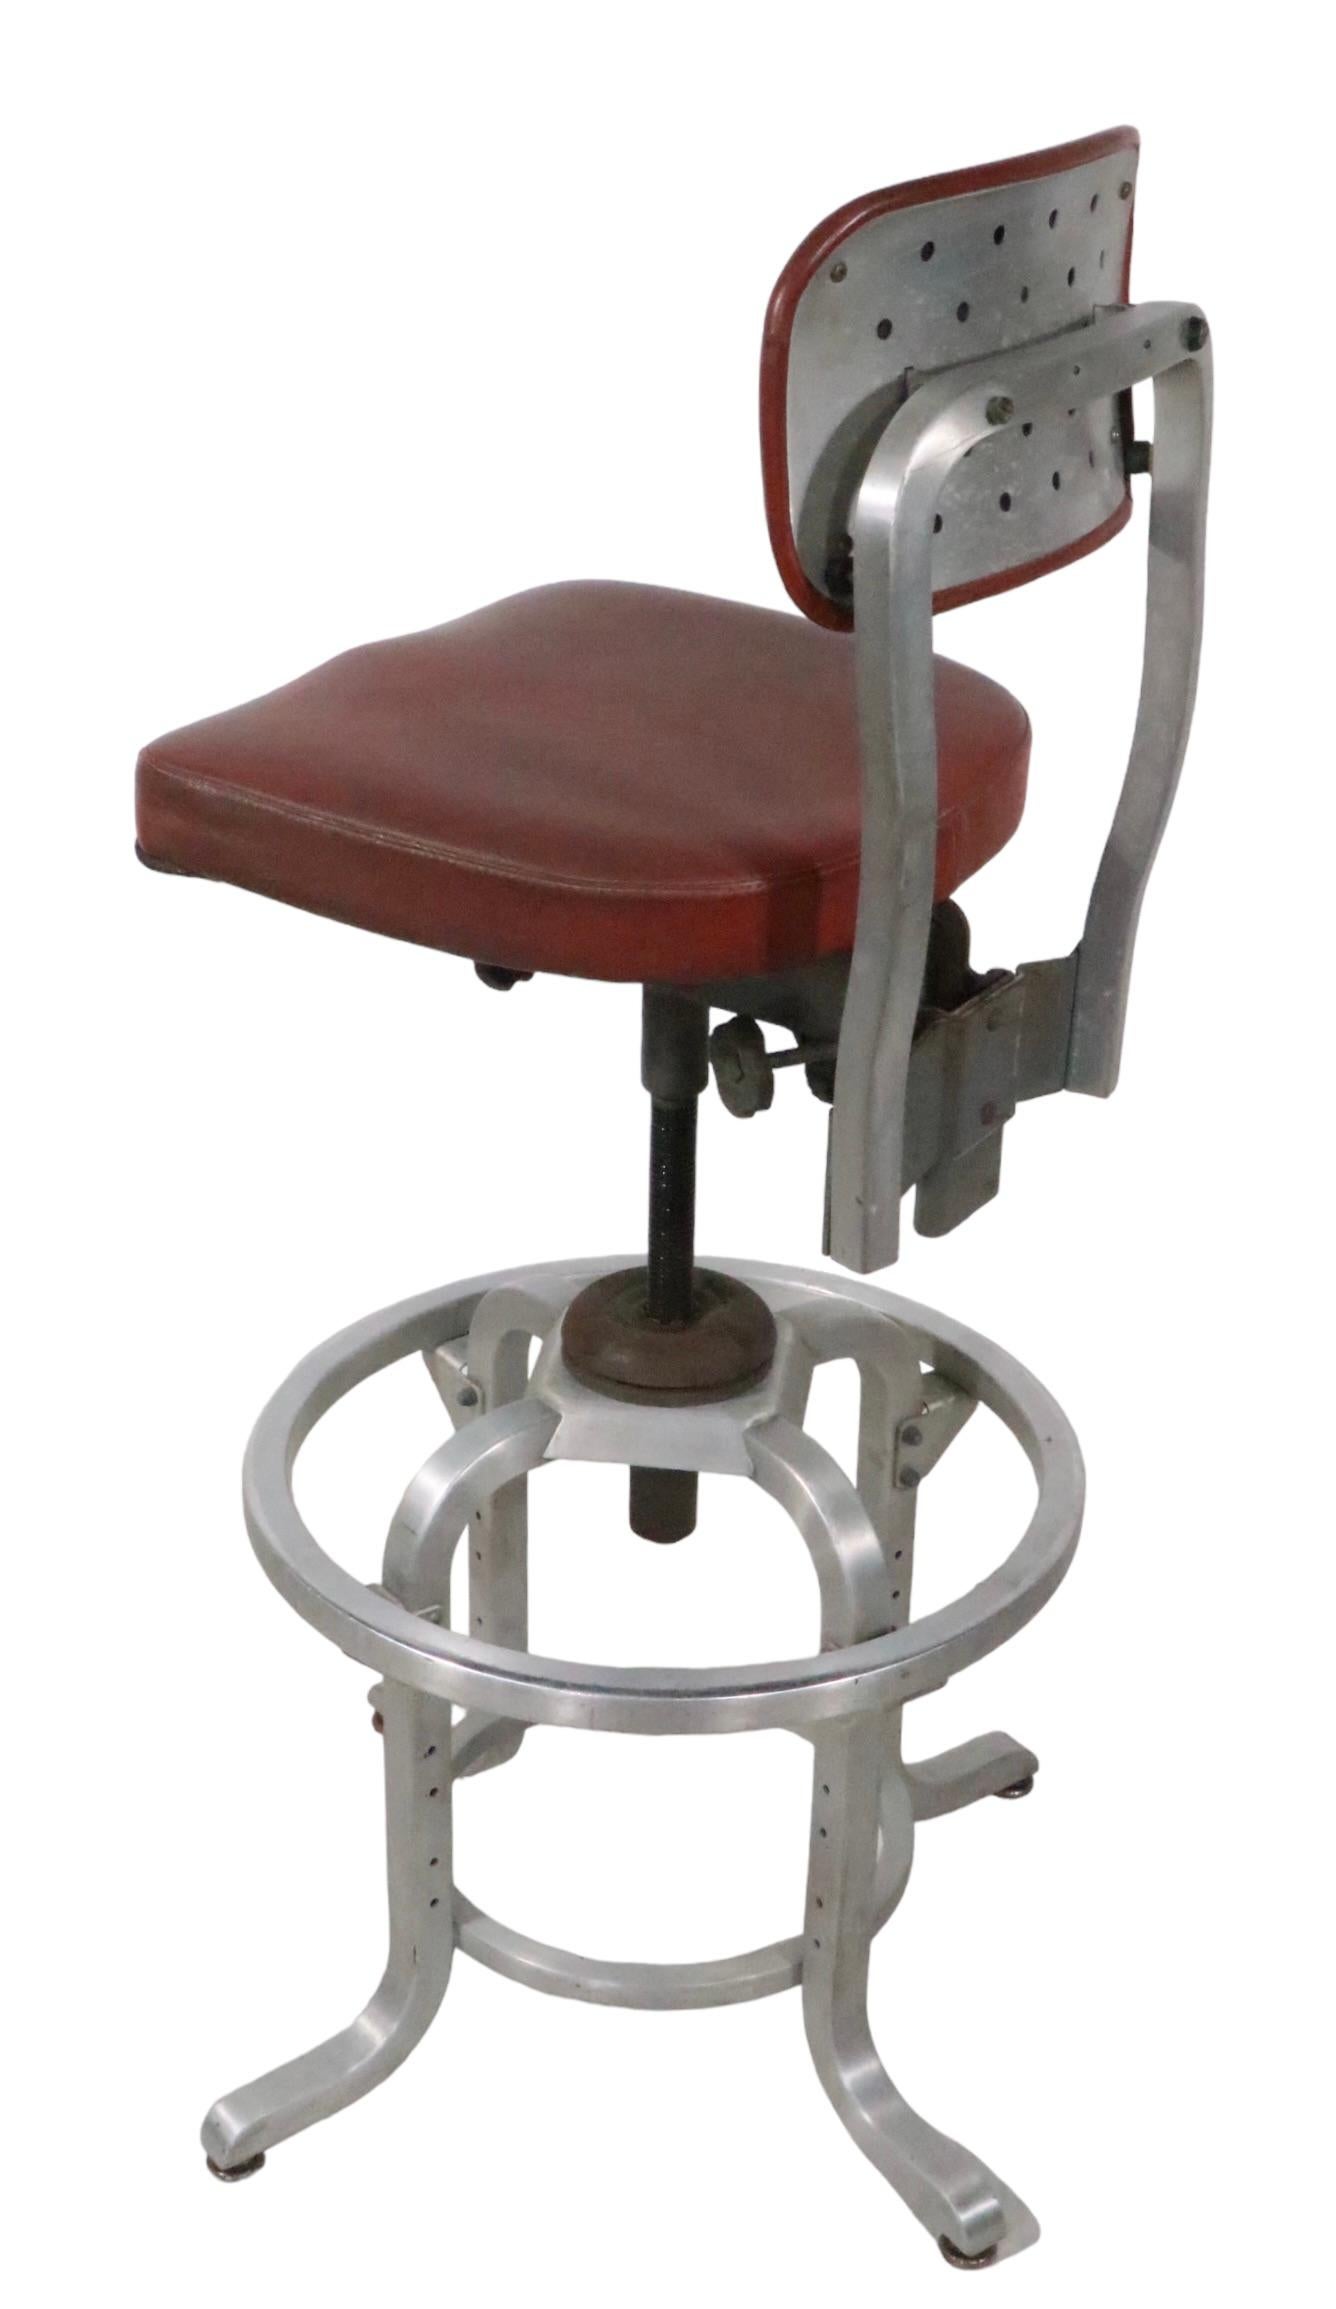 Classic Industrial, Mid Century, Machine Age style drafting stool by General Fireproofing, Good Form. The stool has  a squared aluminum frame structure, vinyl seat and back rest. It features several adjustments, as follows:
Back Rest raises and